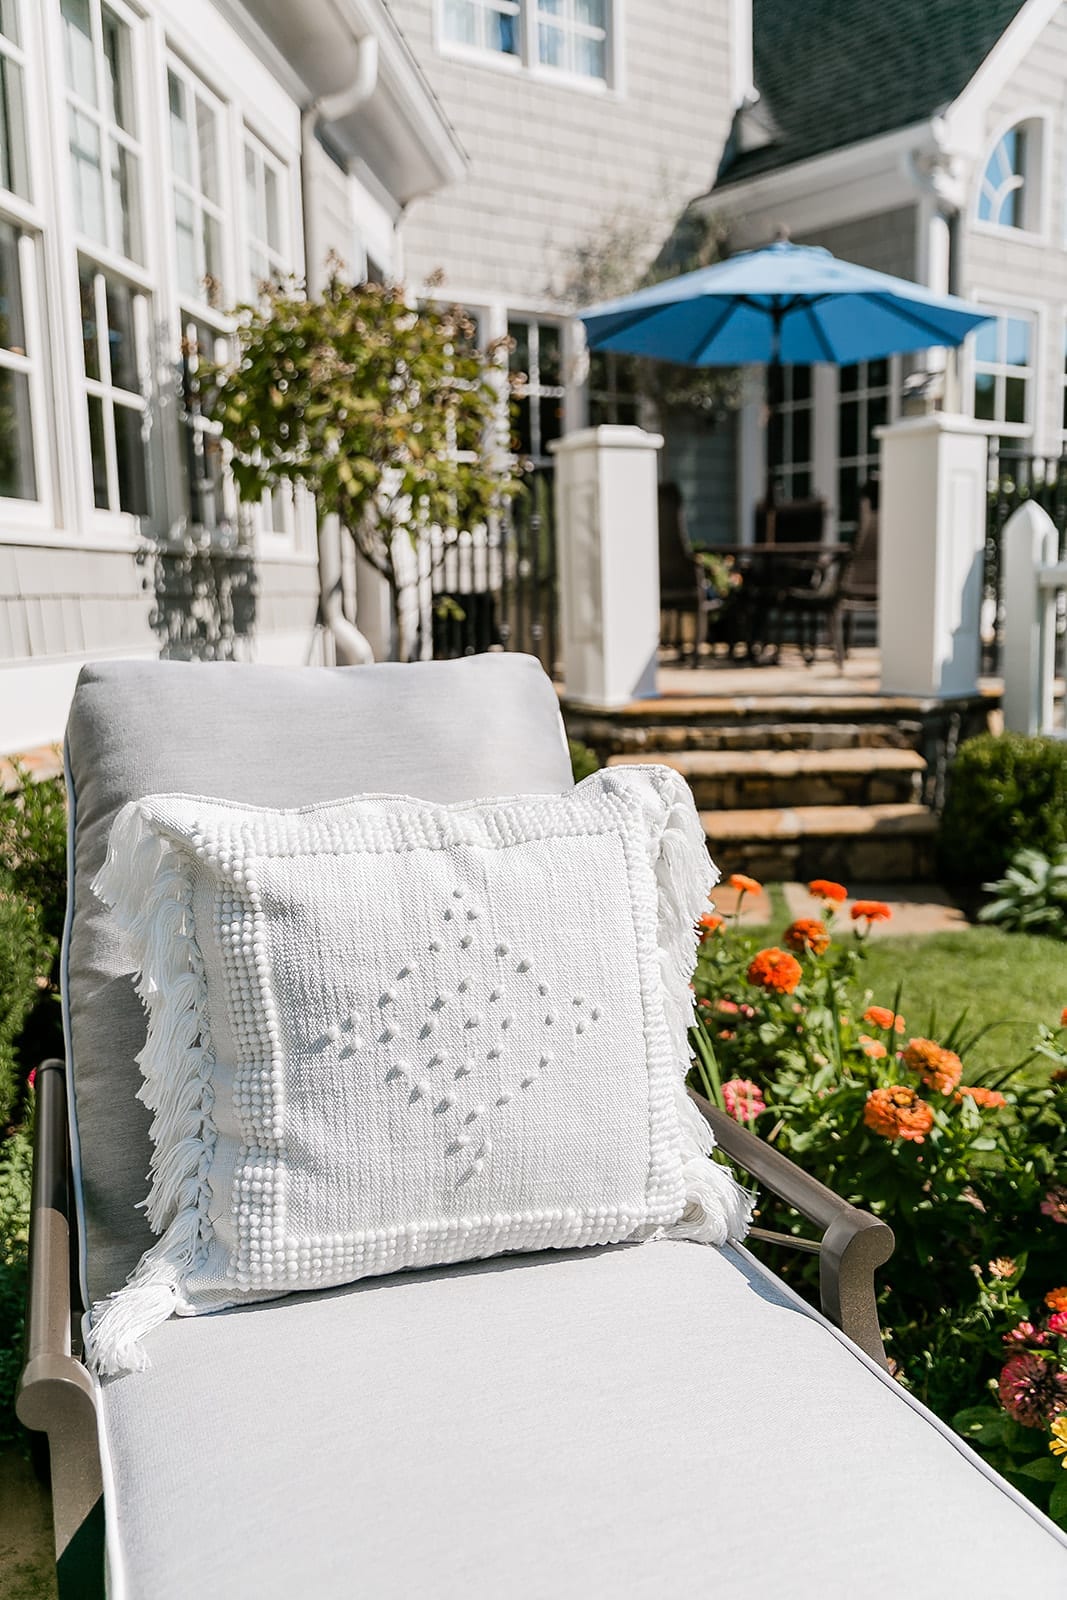 Serena and Lily White Outdoor Pillow on sale. Woodard Andover chaise lounge with Sunbrella blue outdoor umbrella.